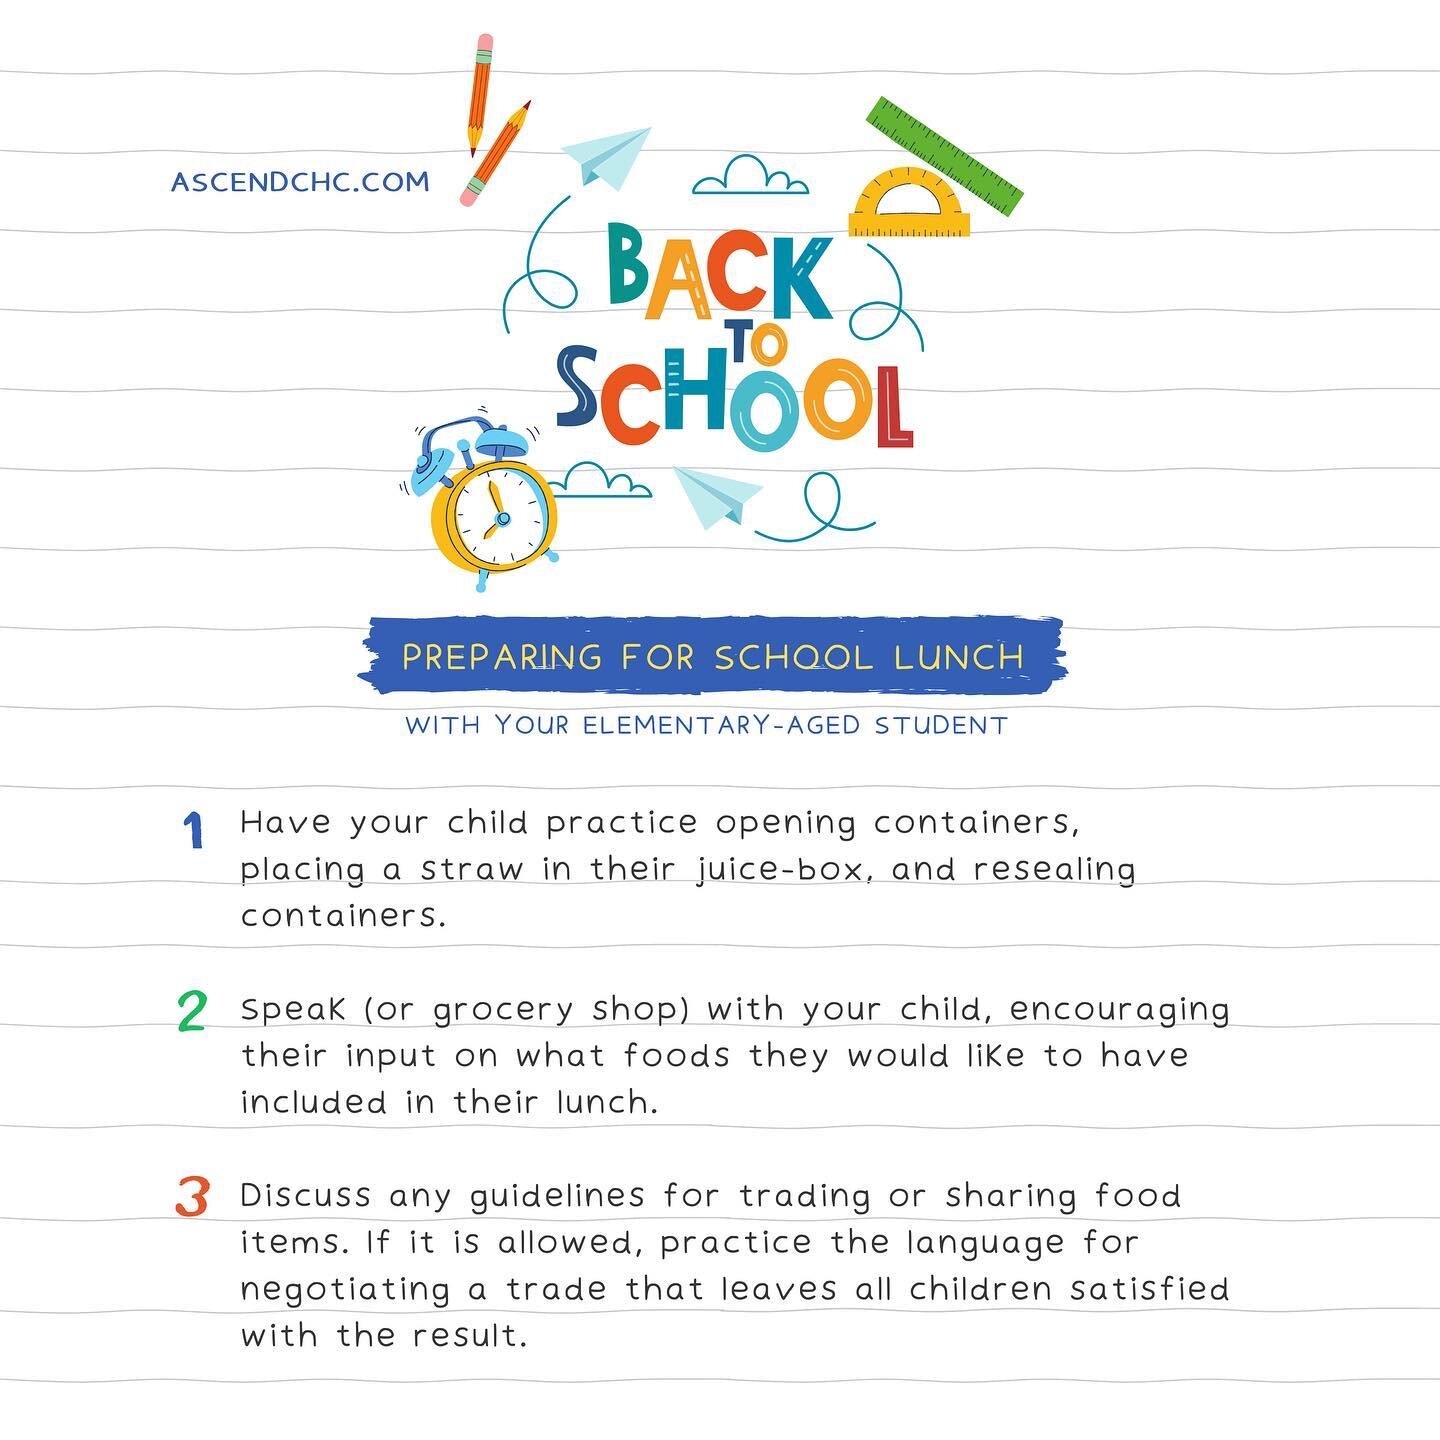 Give your elementary-aged students a head start this fall, preparing for the school lunch routine. For other tips for returning to the classroom, follow @ascend_champaign on Instagram, or call: (312) 283-2650 to learn more. 
.
.
#ChampaignUrbana #cha